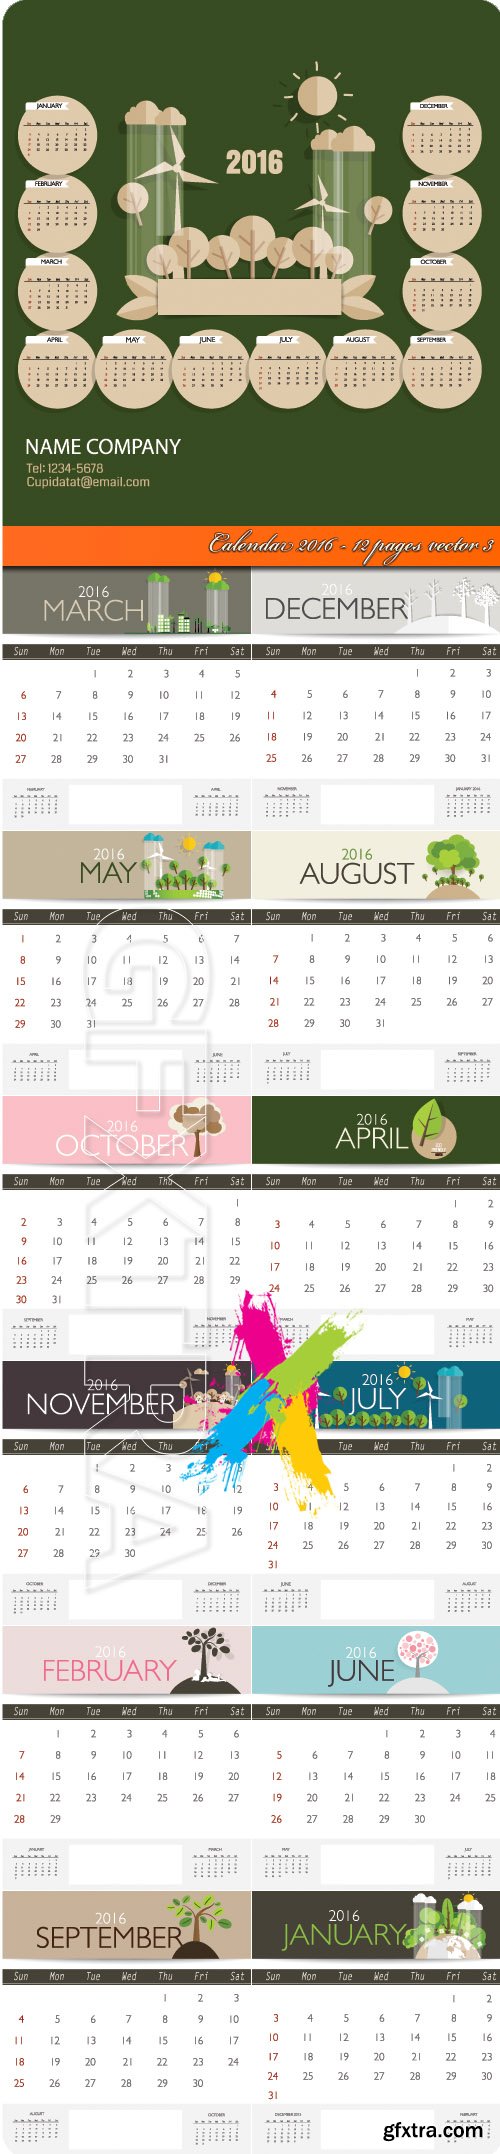 Calendar 2016 - 12 pages vector 3